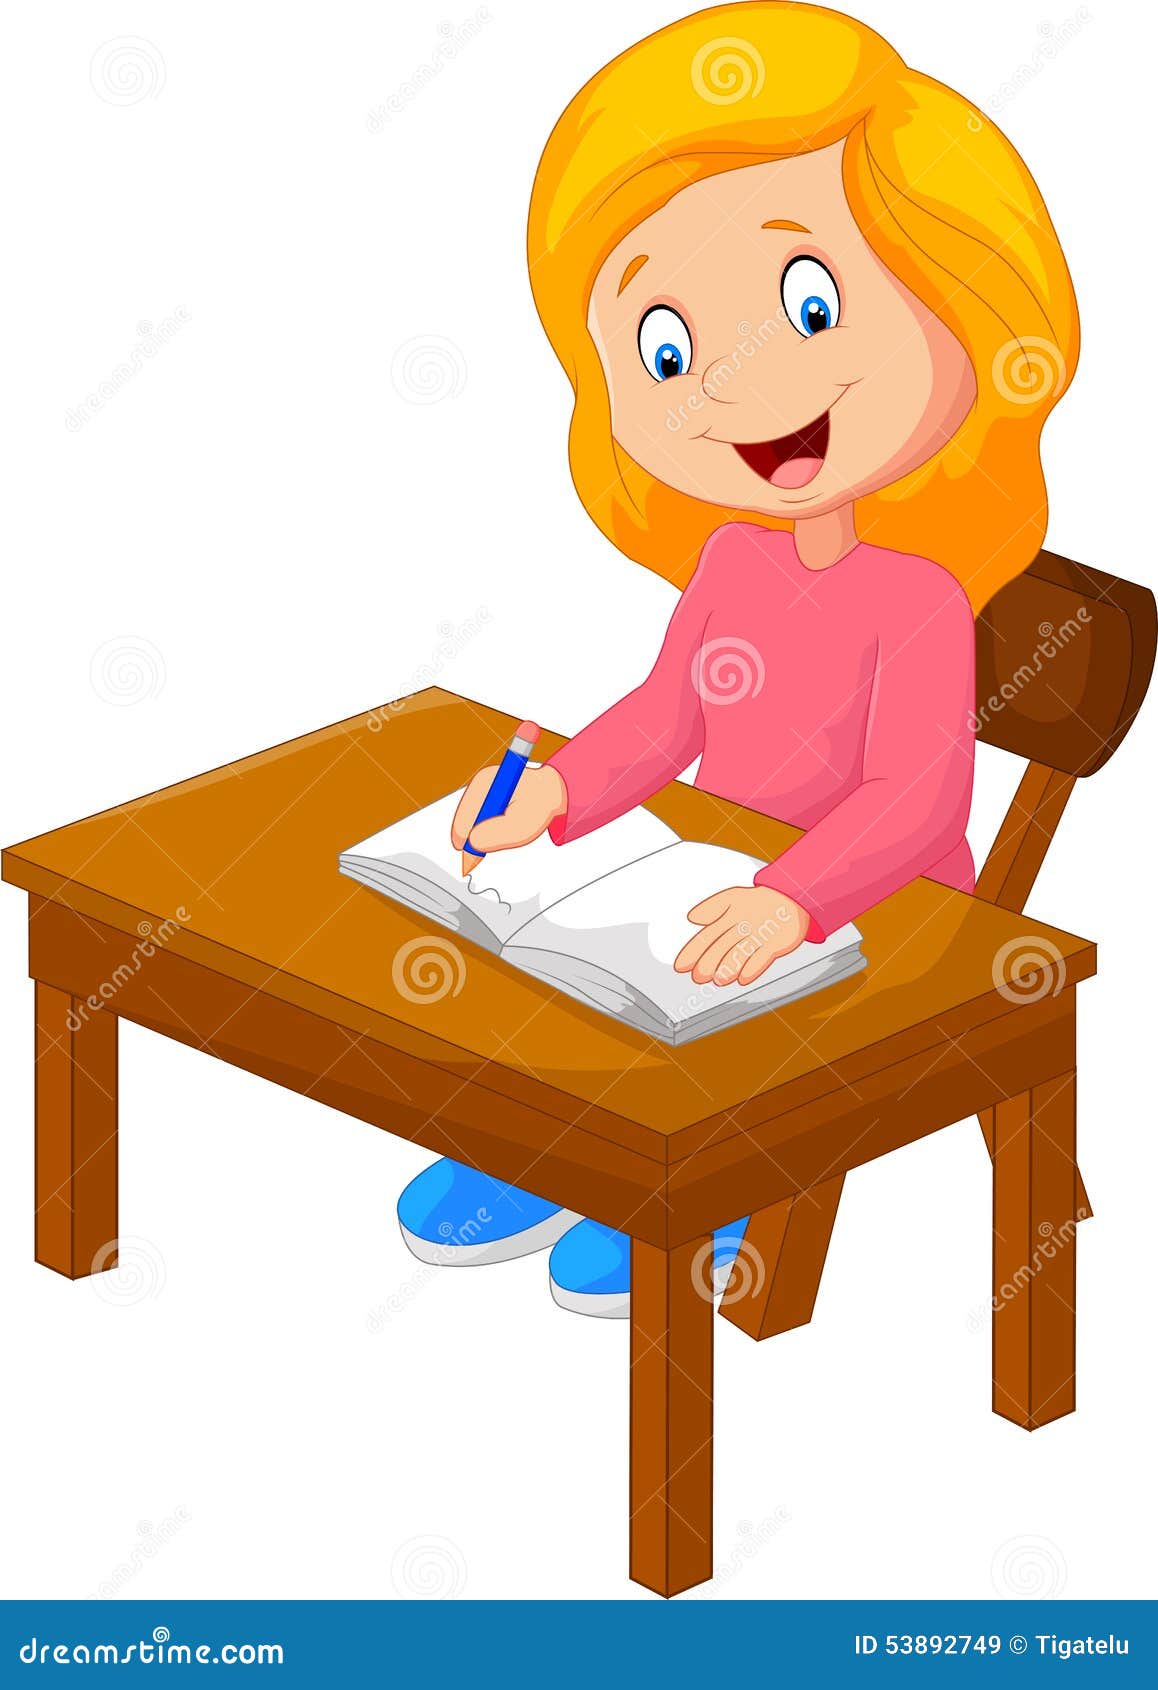 Cartoon Writing Text in the Book Stock Vector - Illustration of smile,  cartoon: 53892749